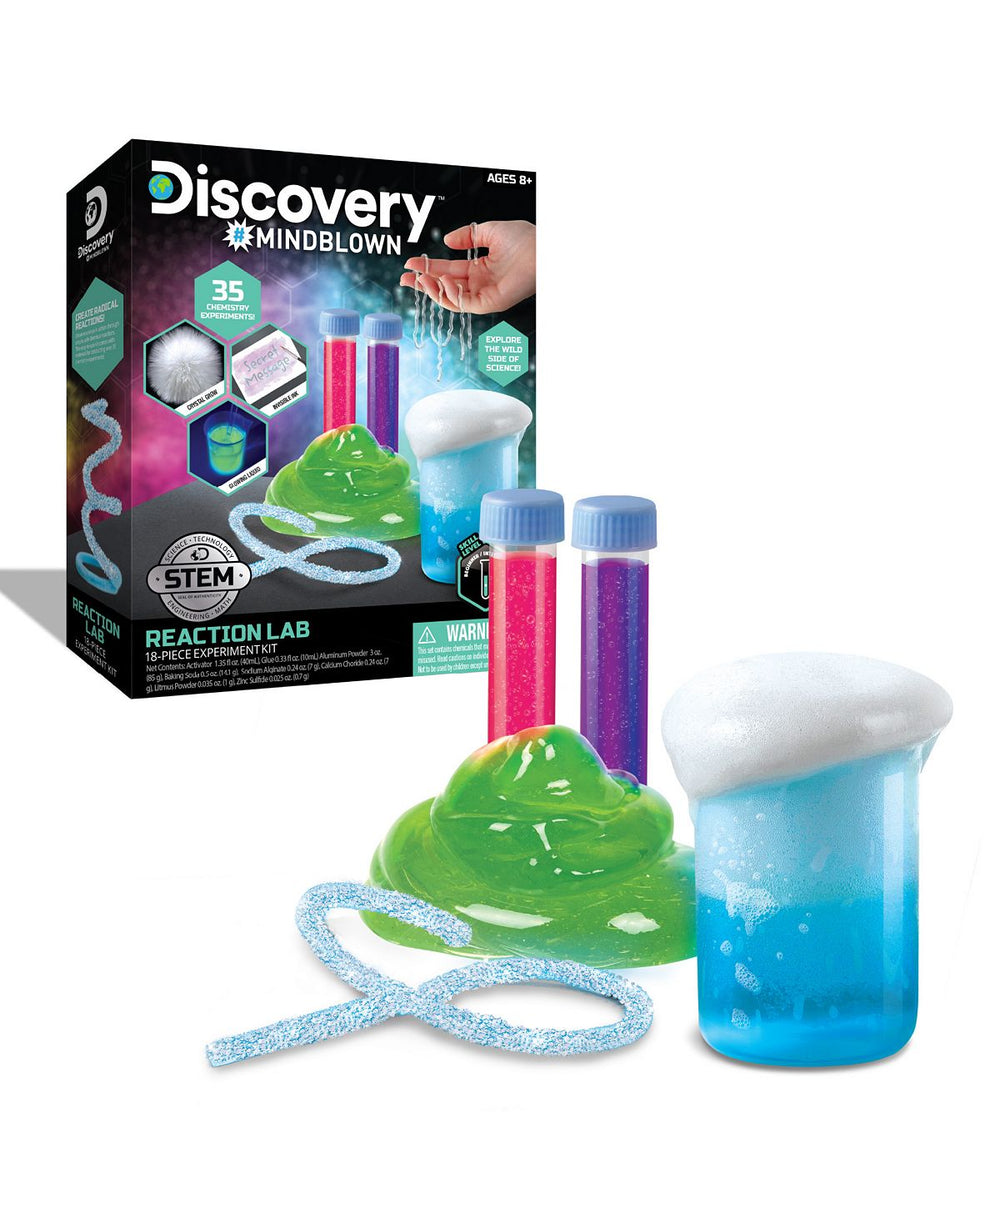 Discovery #MINDBLOWN Reaction Lab Science Experiment Kit, 18-Piece Set